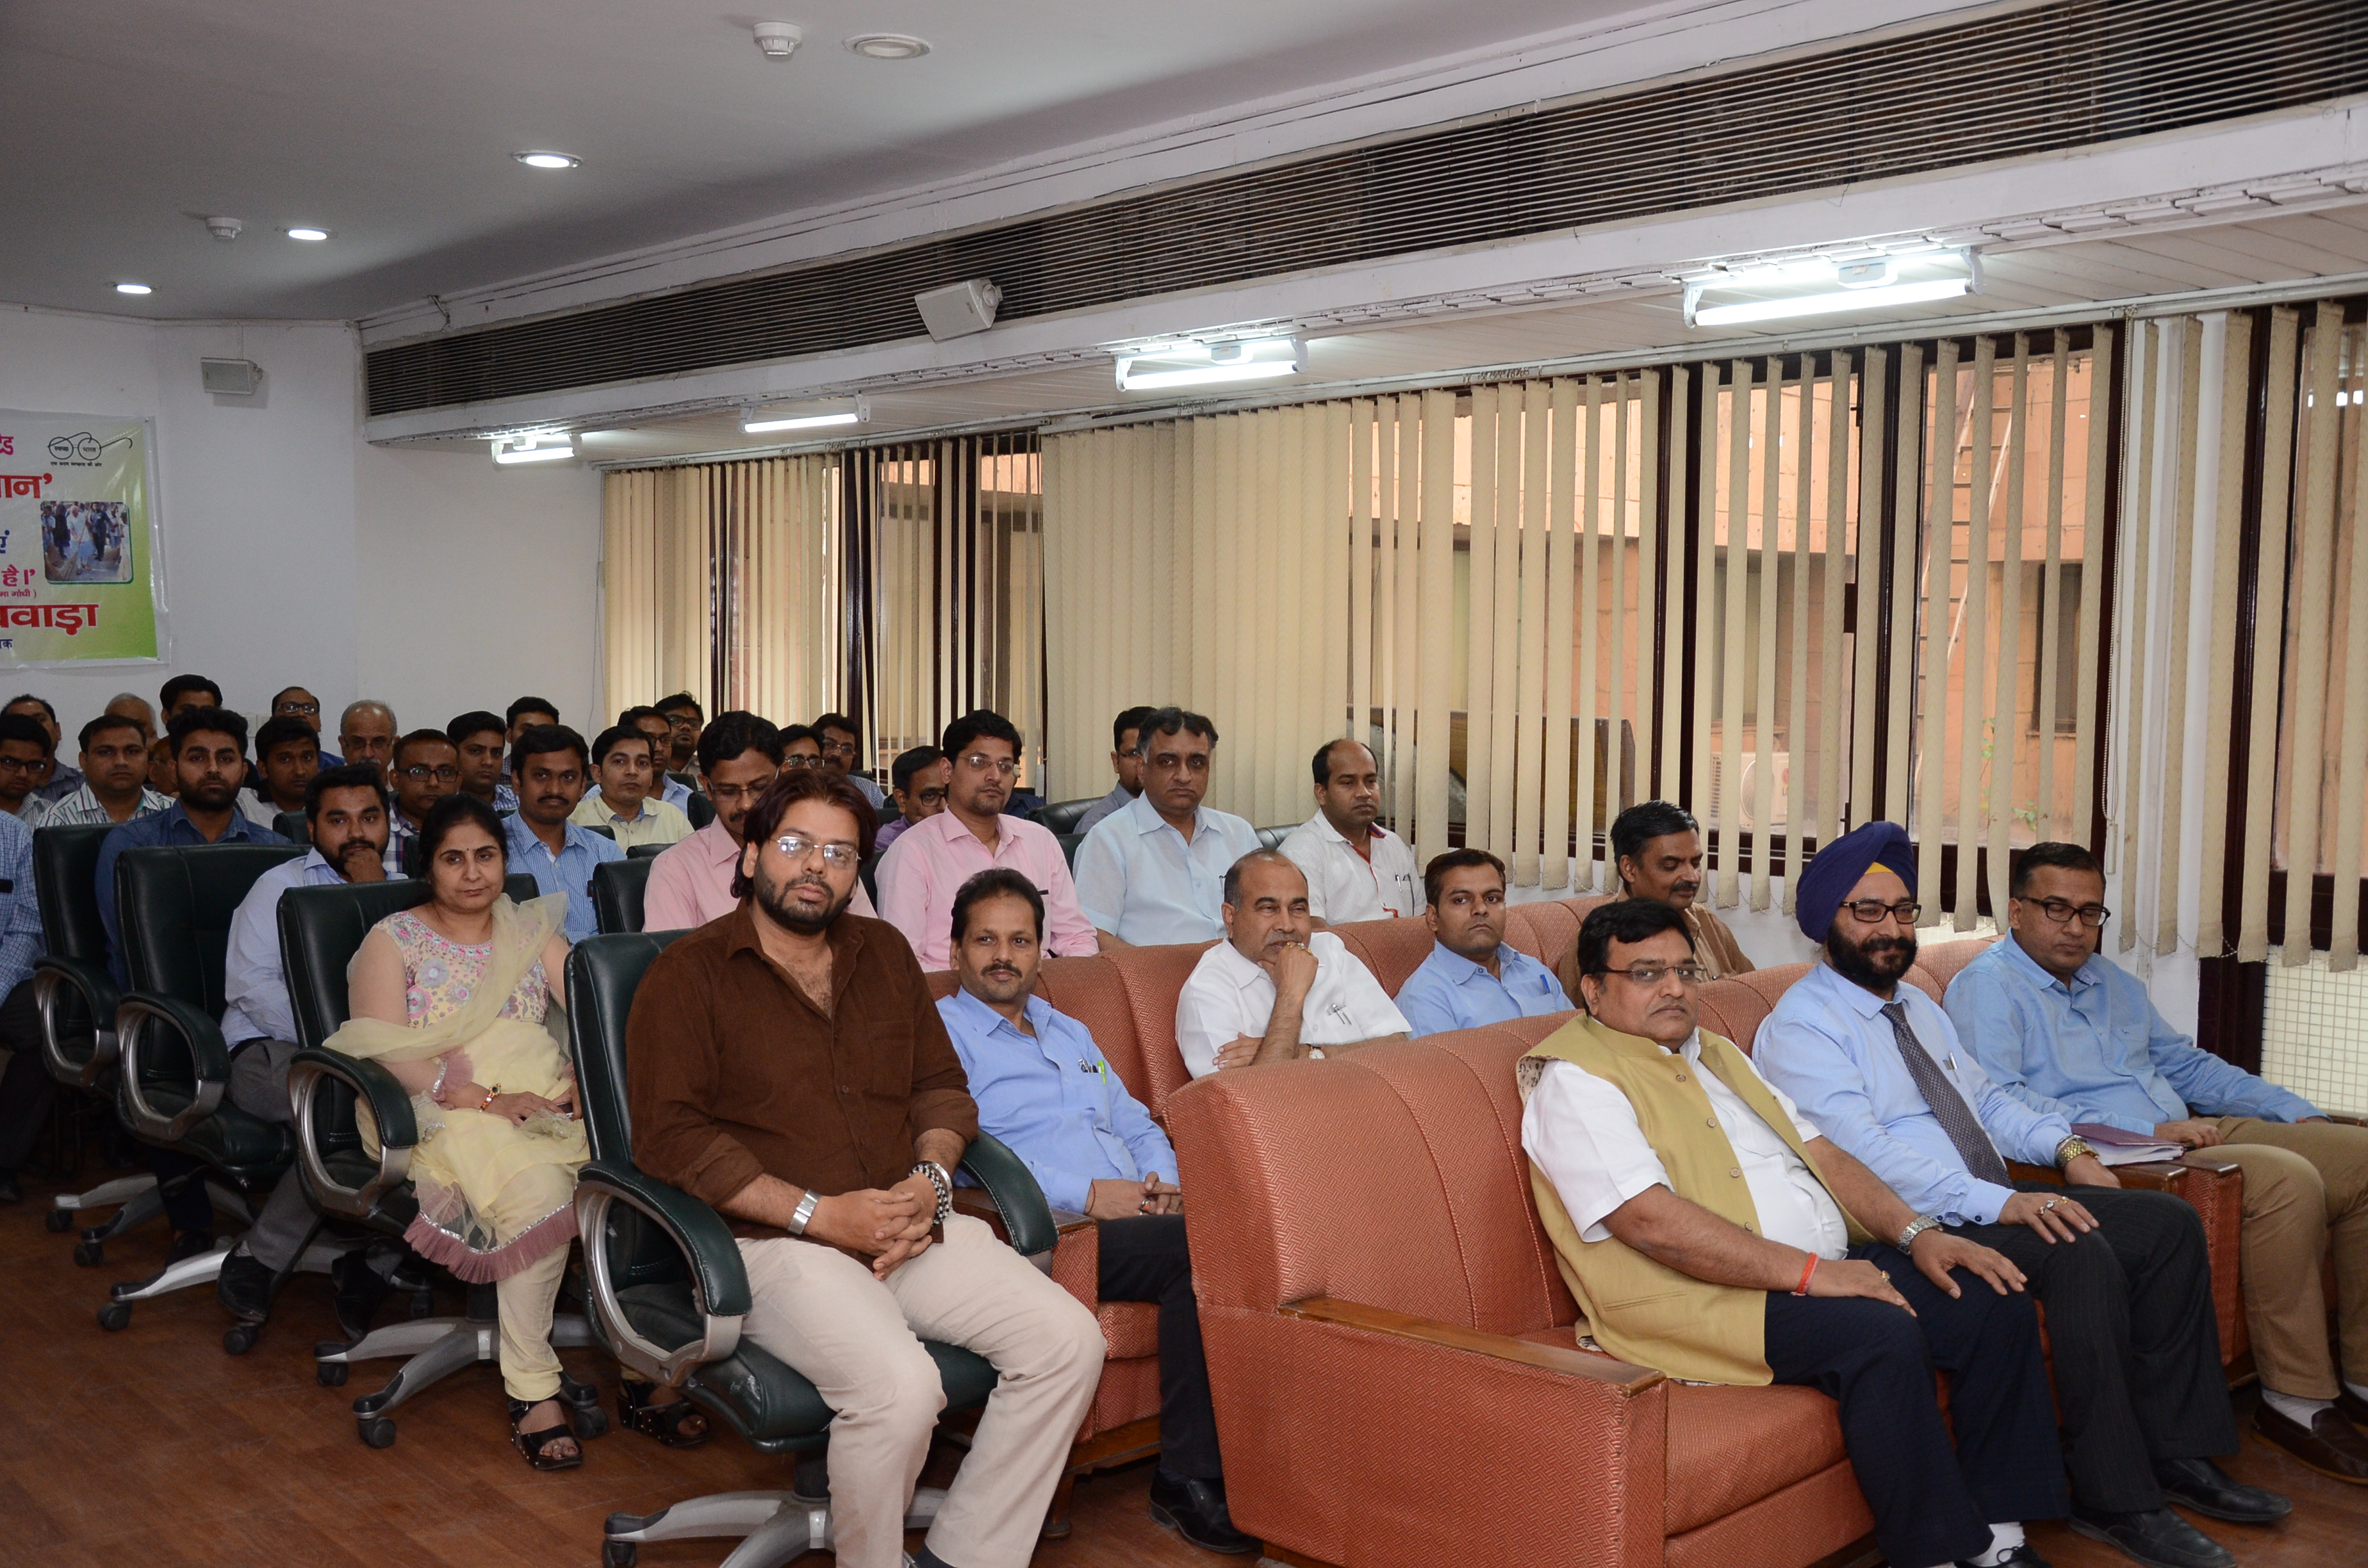  The employees of the corporation participating in the program.